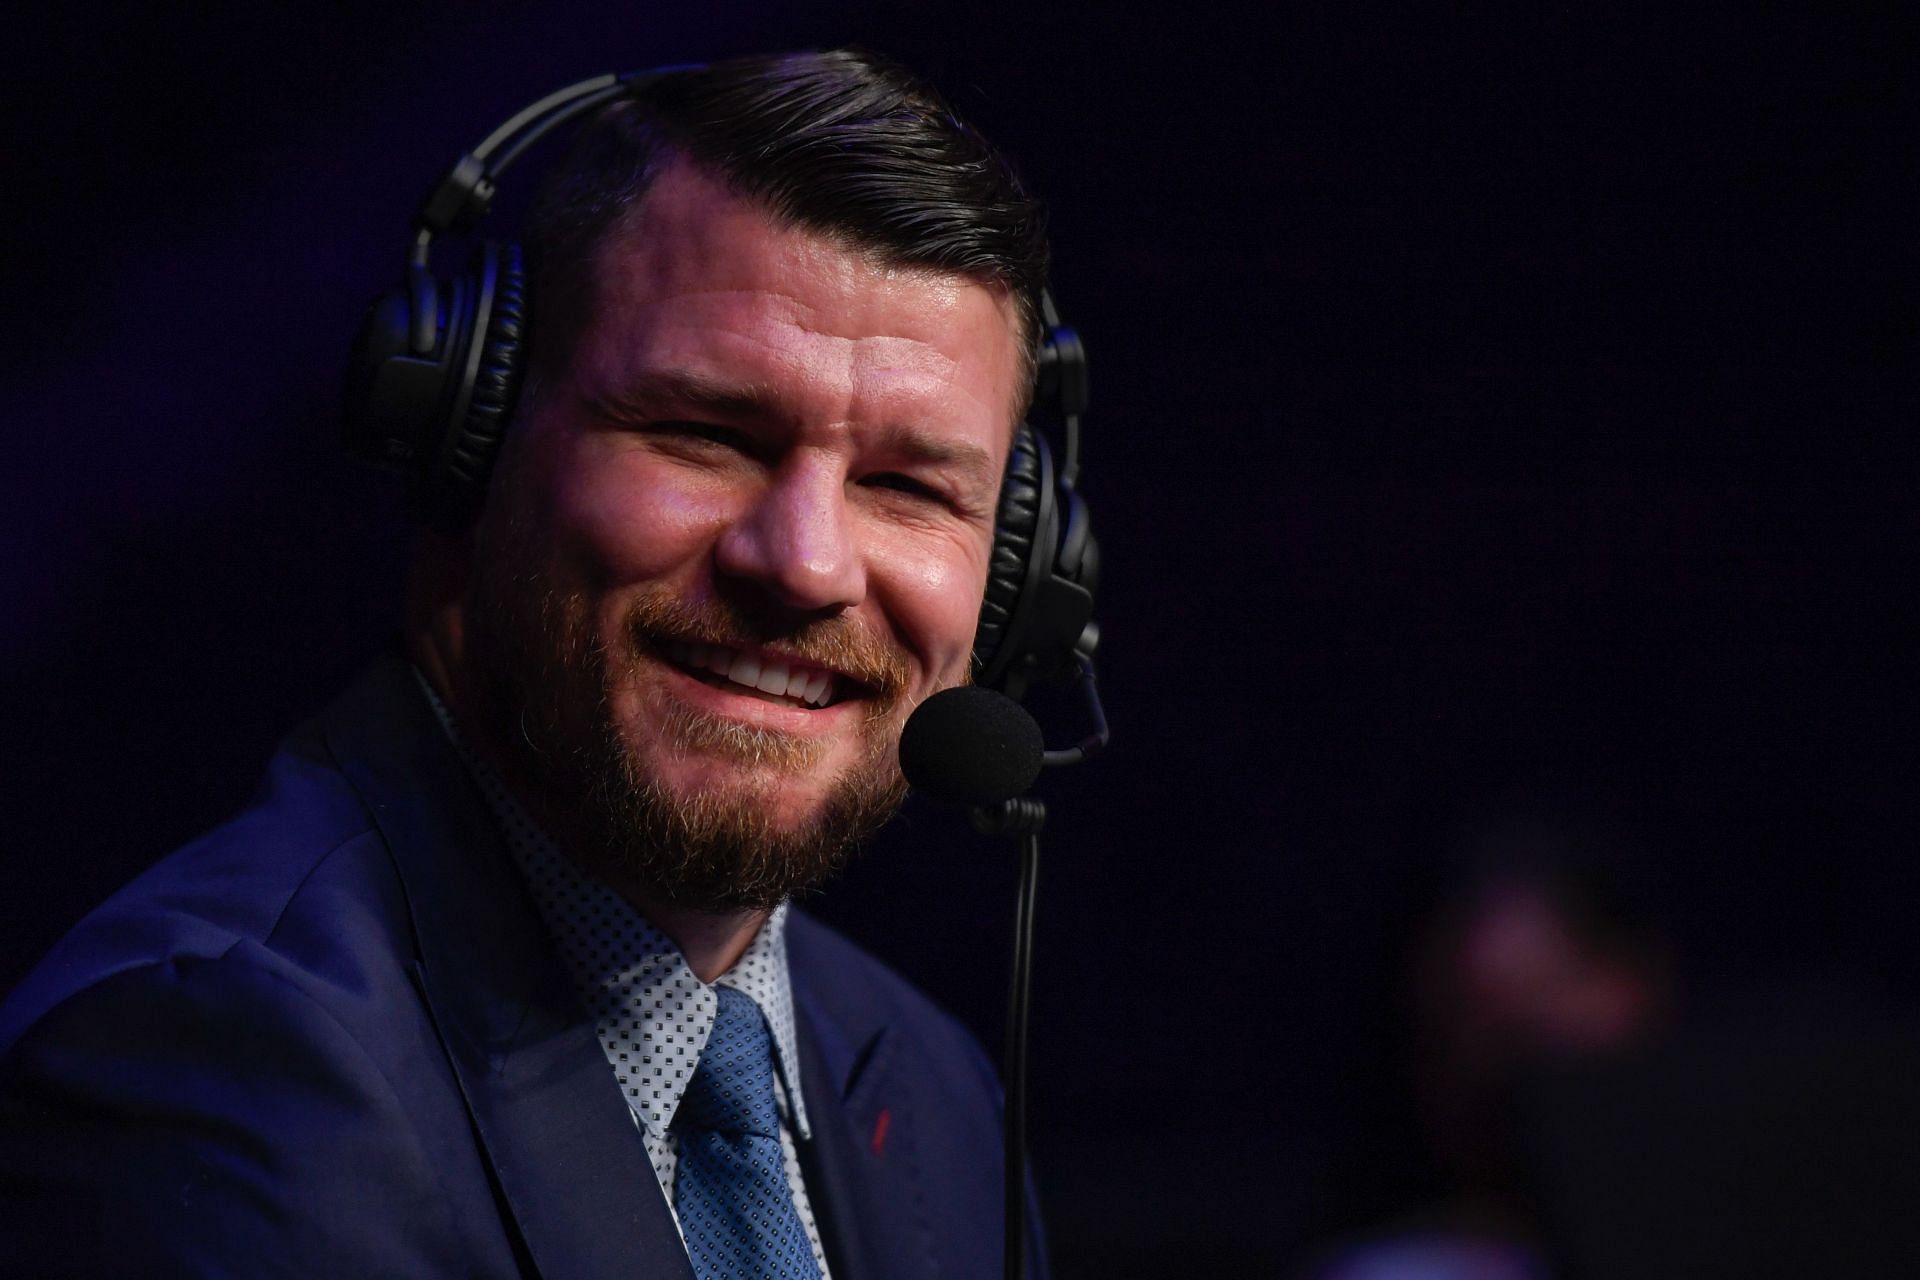 Michael Bisping reveals his pick for Charles Oliveira vs. Dustin Poirier